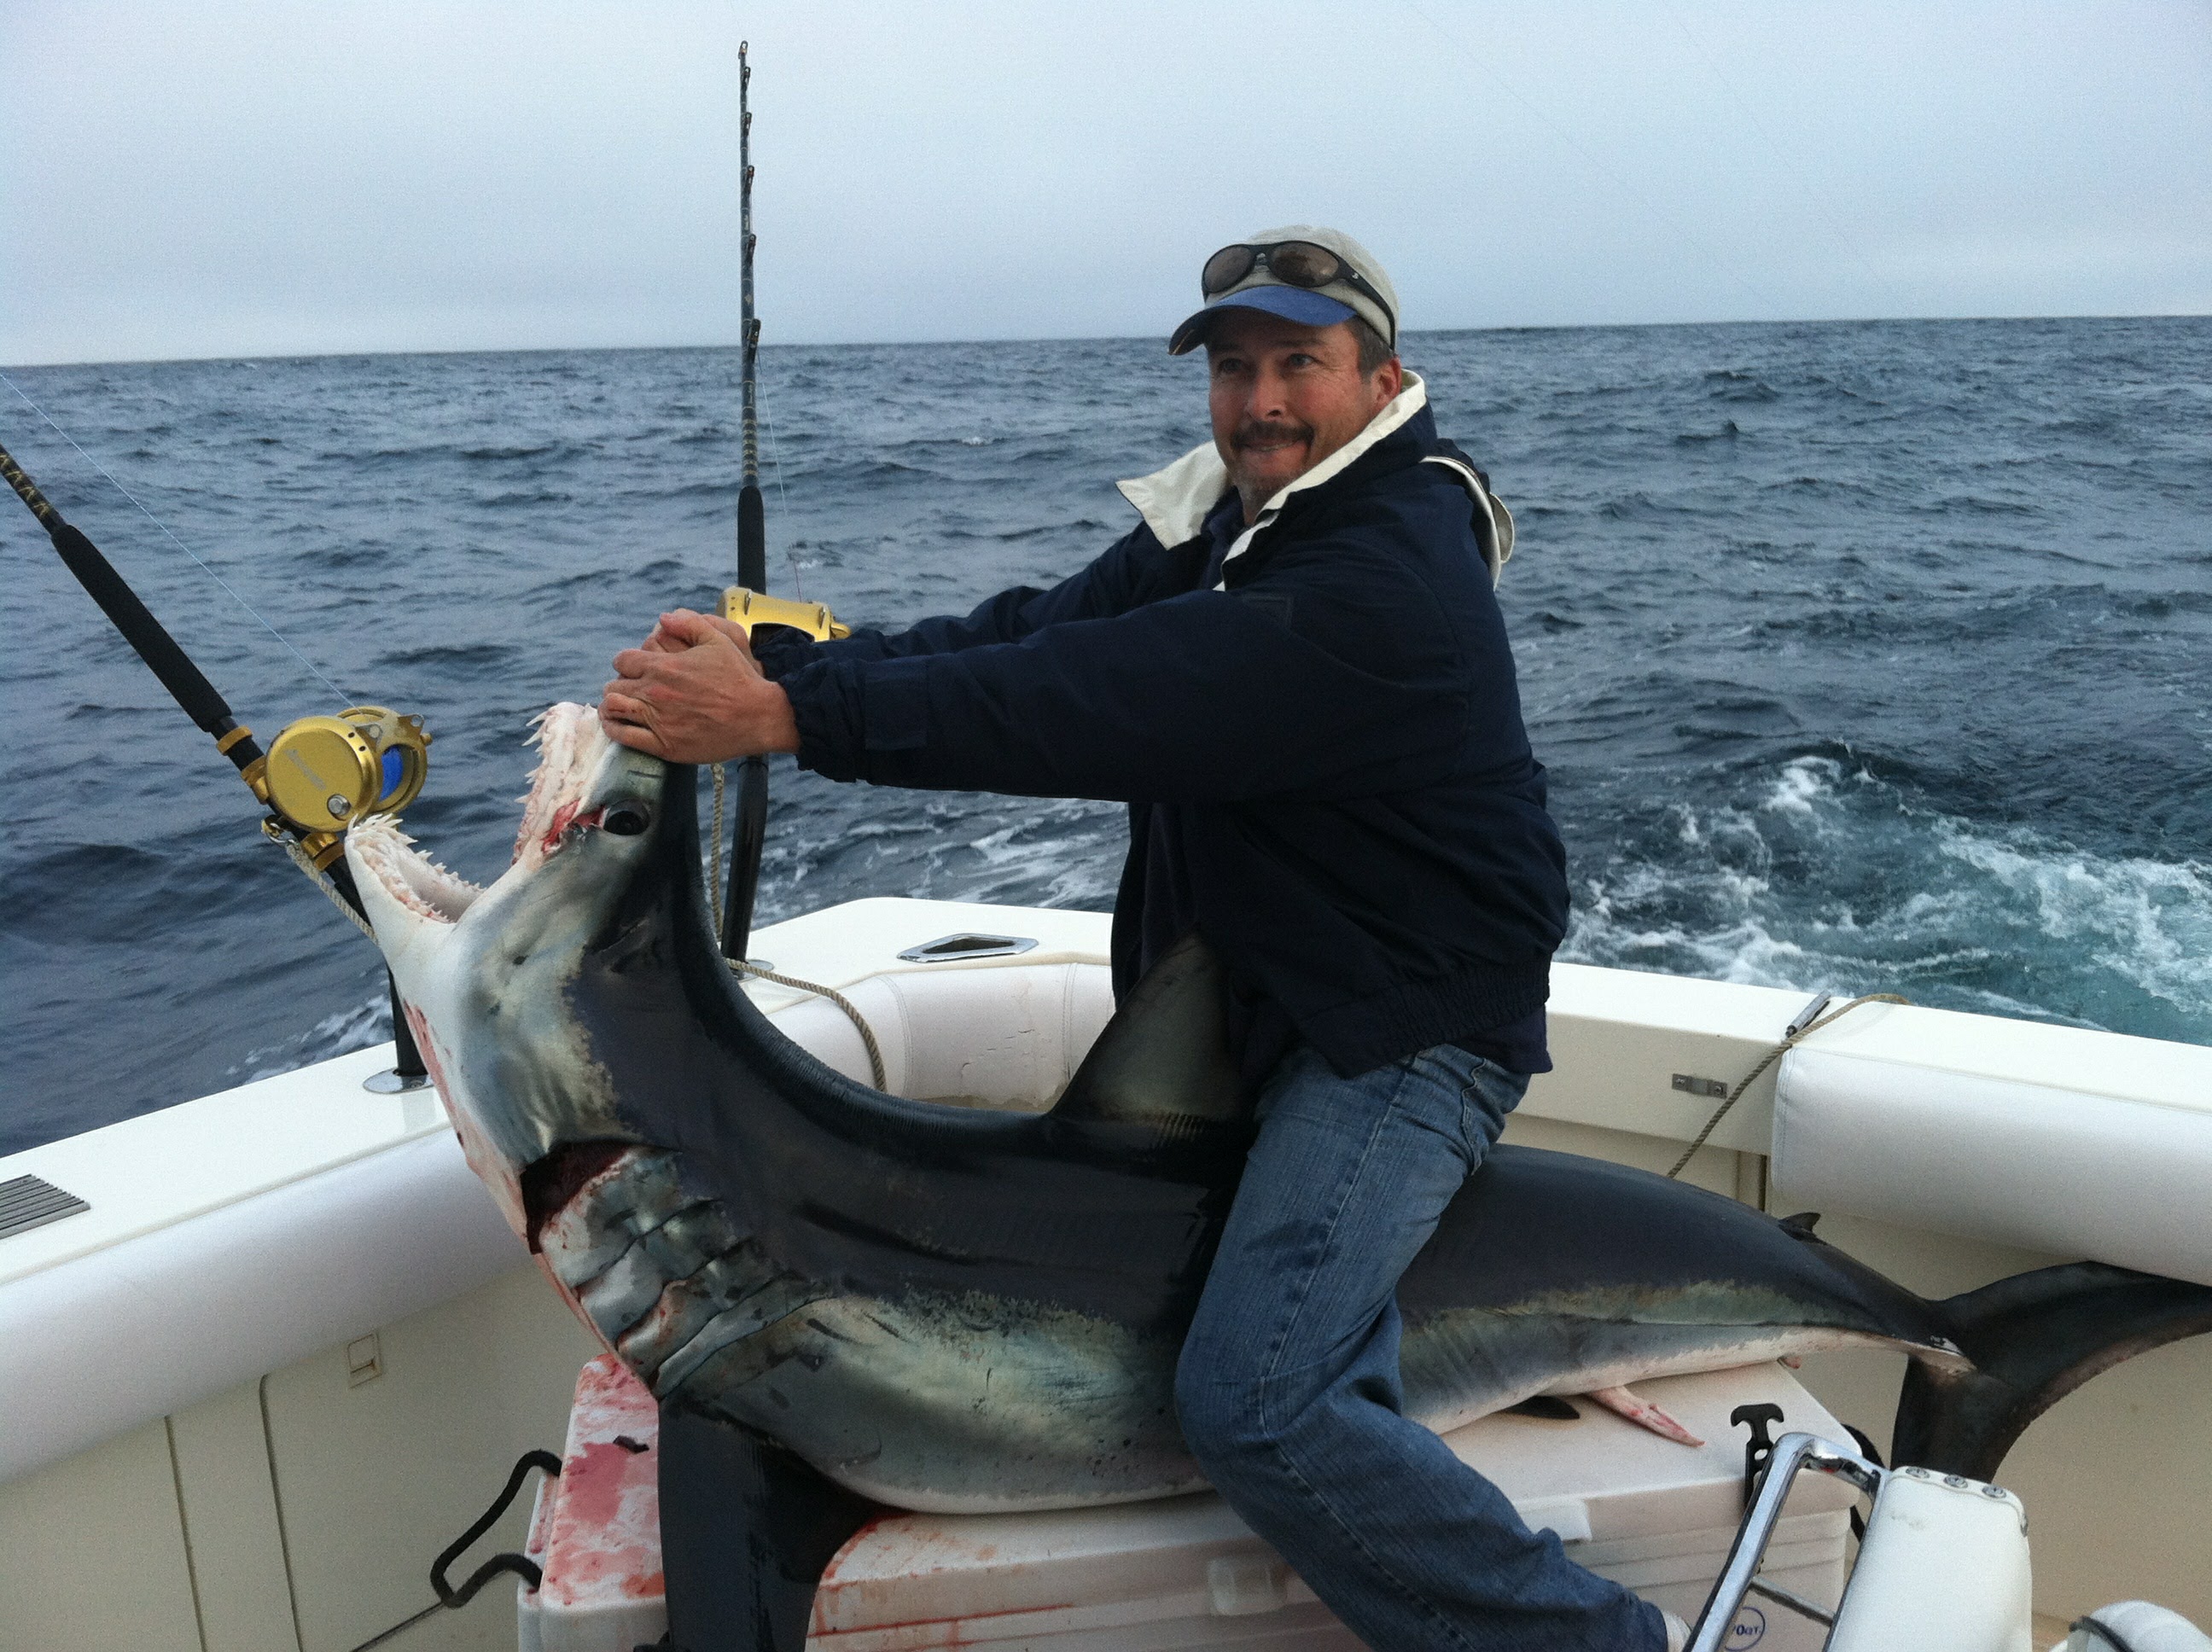 Tournament Shark Pro Gear Archives - Fisherman's Outfitter